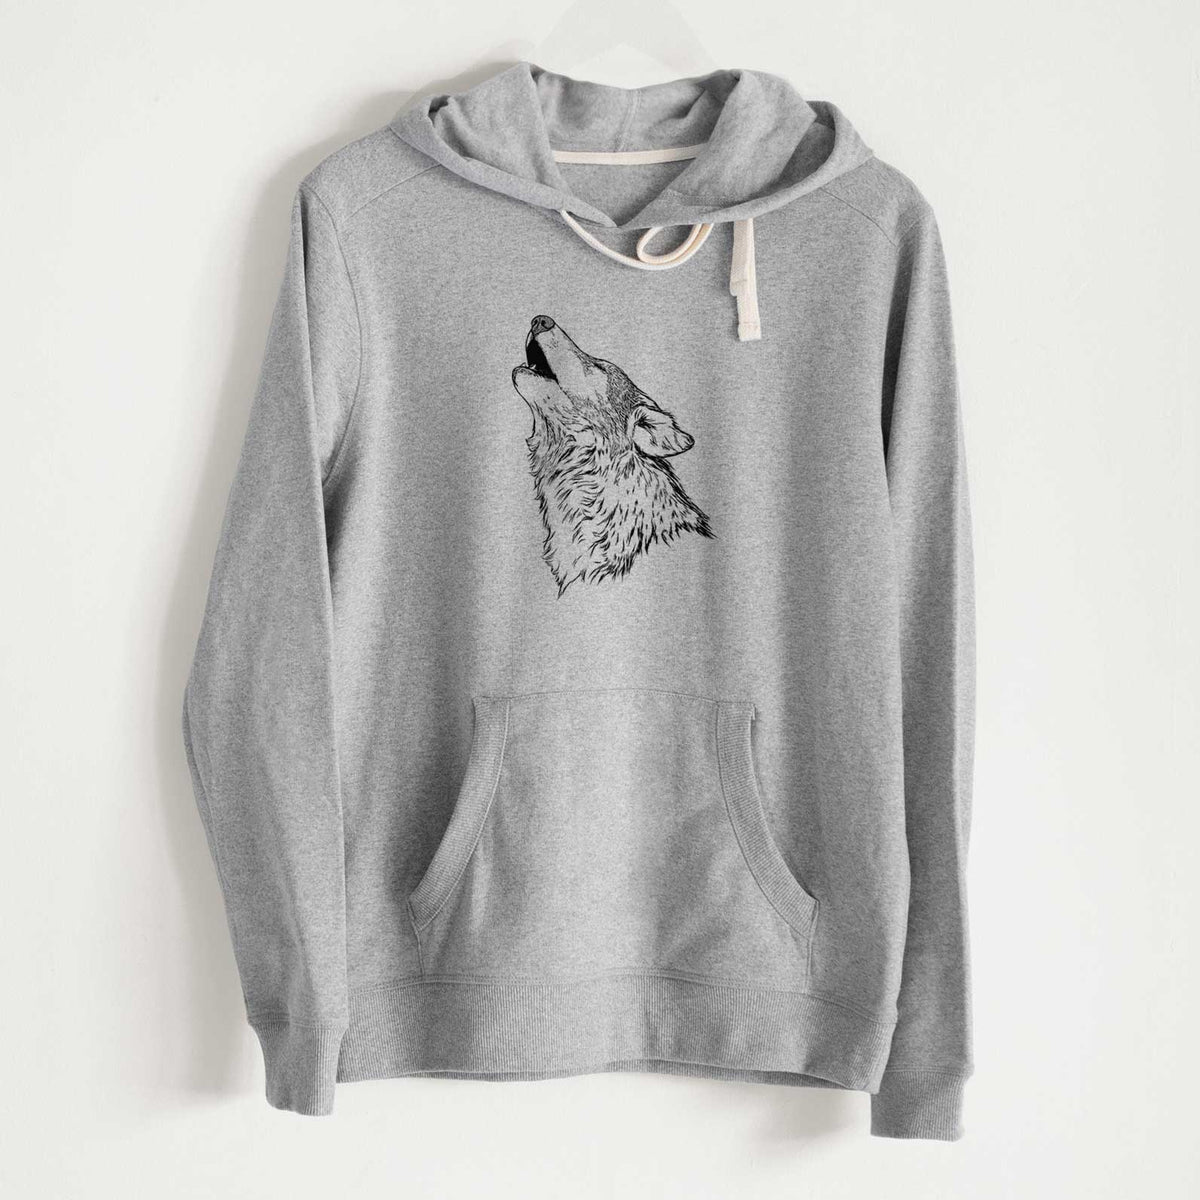 Canis lupus - Grey Wolf Howling - Unisex Recycled Hoodie - CLOSEOUT - FINAL SALE